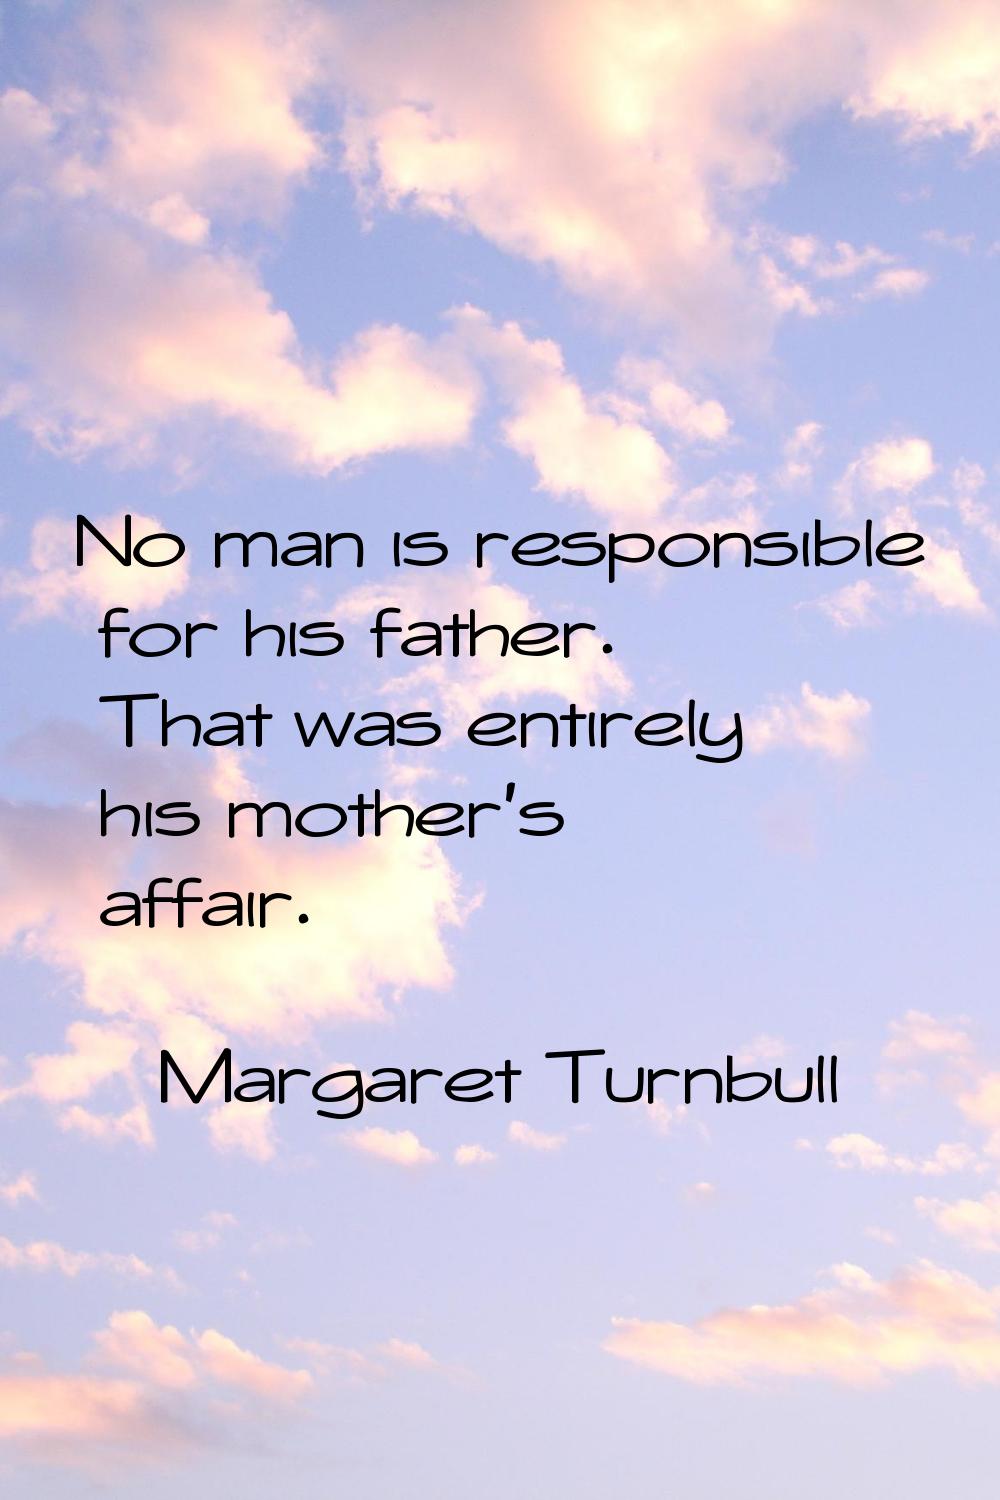 No man is responsible for his father. That was entirely his mother's affair.